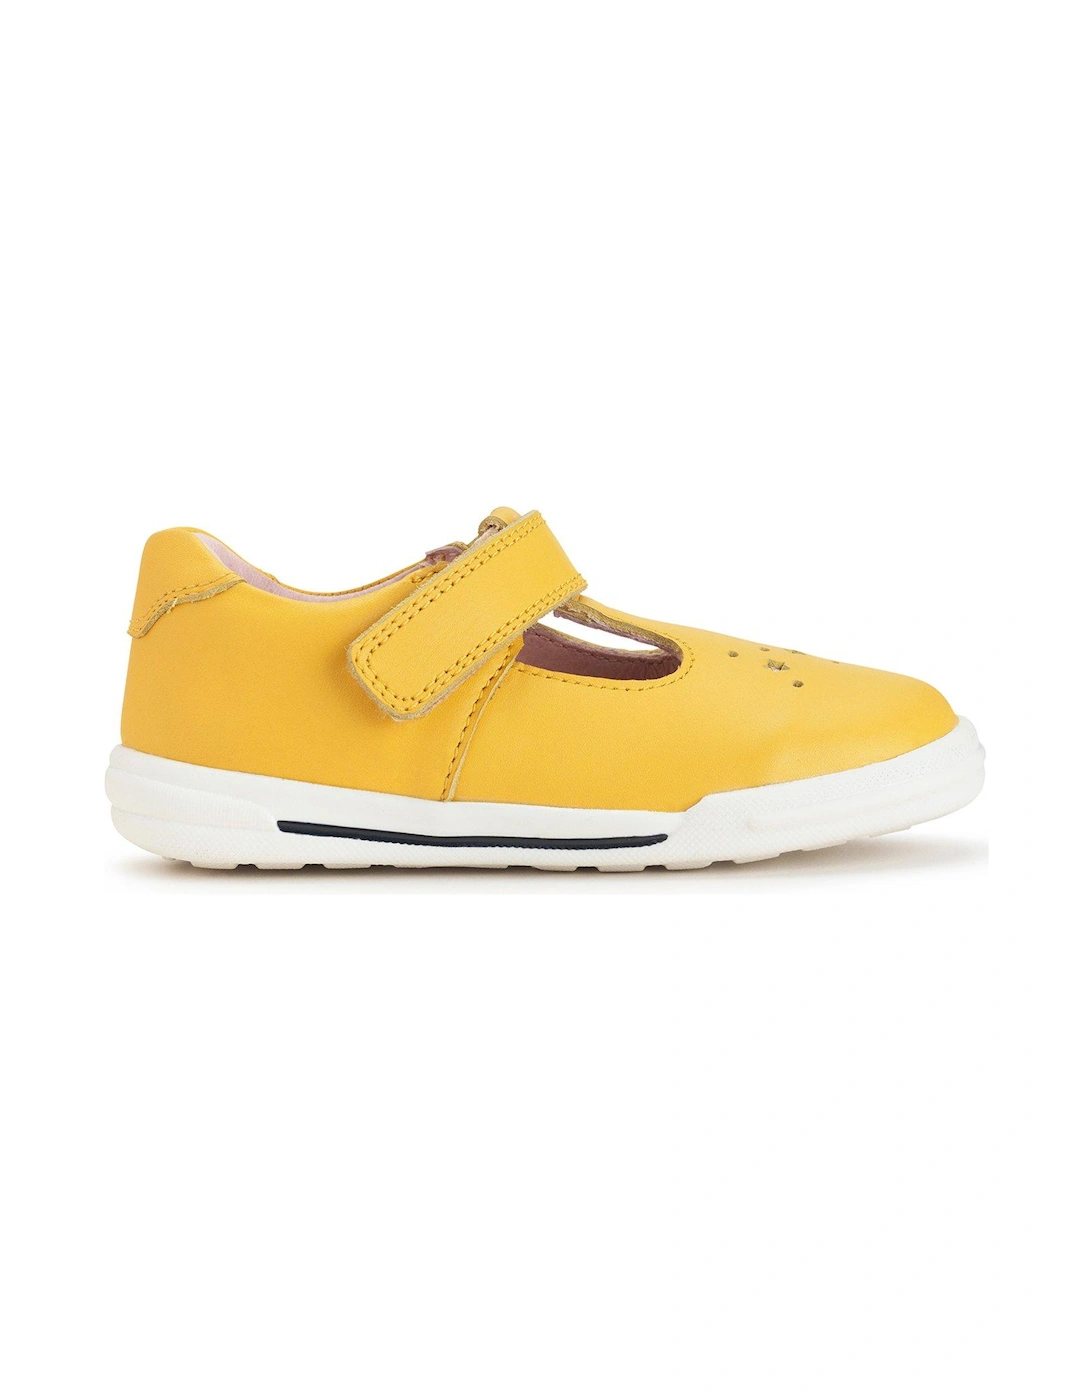 Playground Girls Yellow Soft Leather T-Bar Shoes with Star Detailing - Yellow, 2 of 1